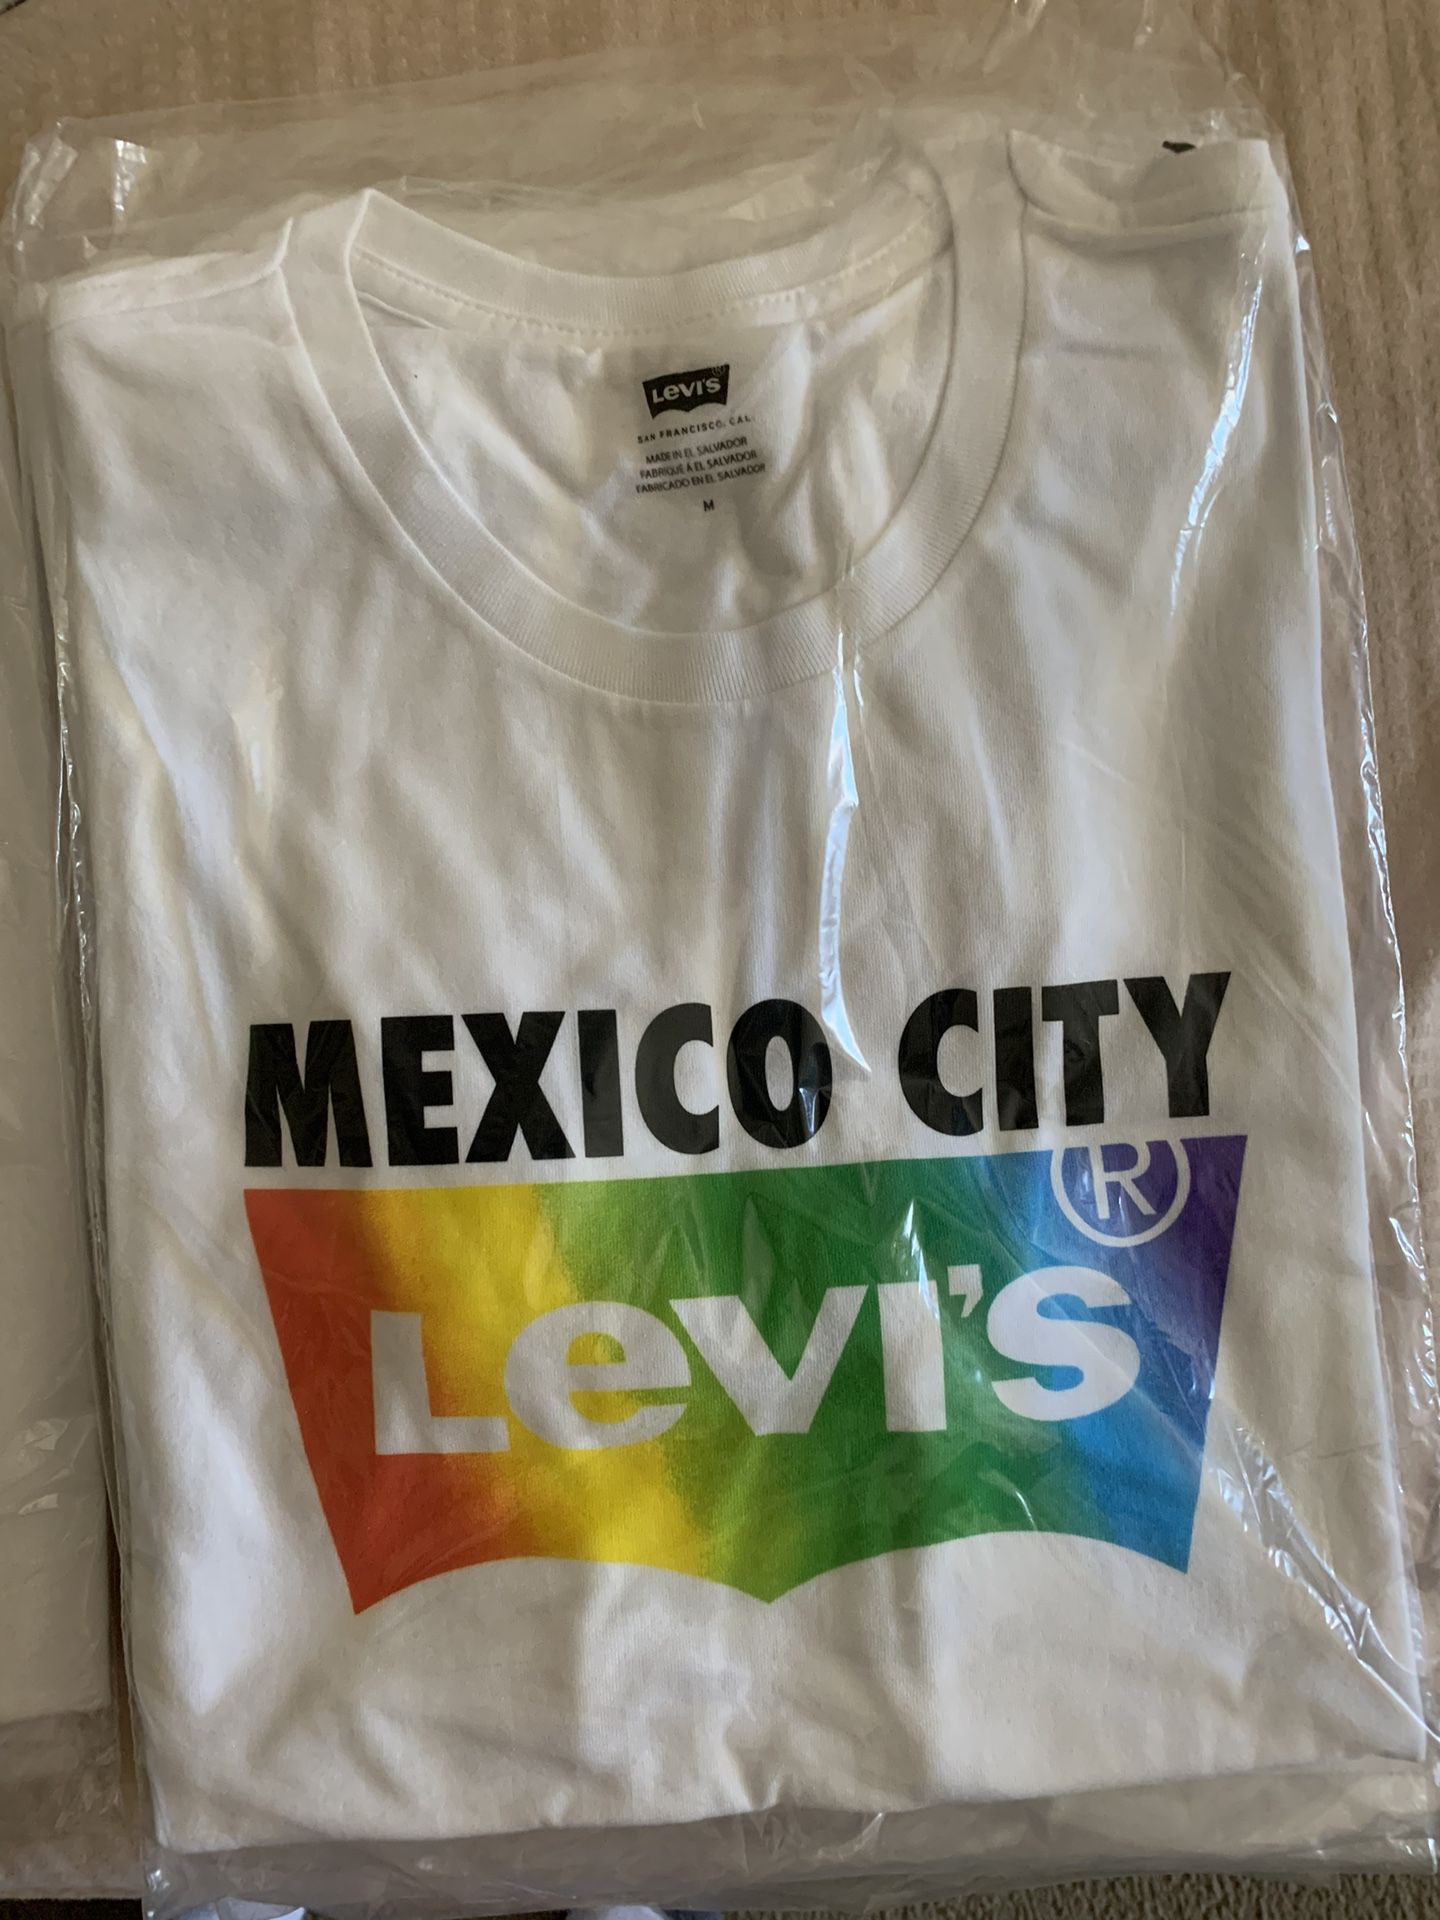 Levi's - Pride - Rainbow - T-Shirt -(New)  Mexico City. Still In The Plastic It Came In  (Medium)